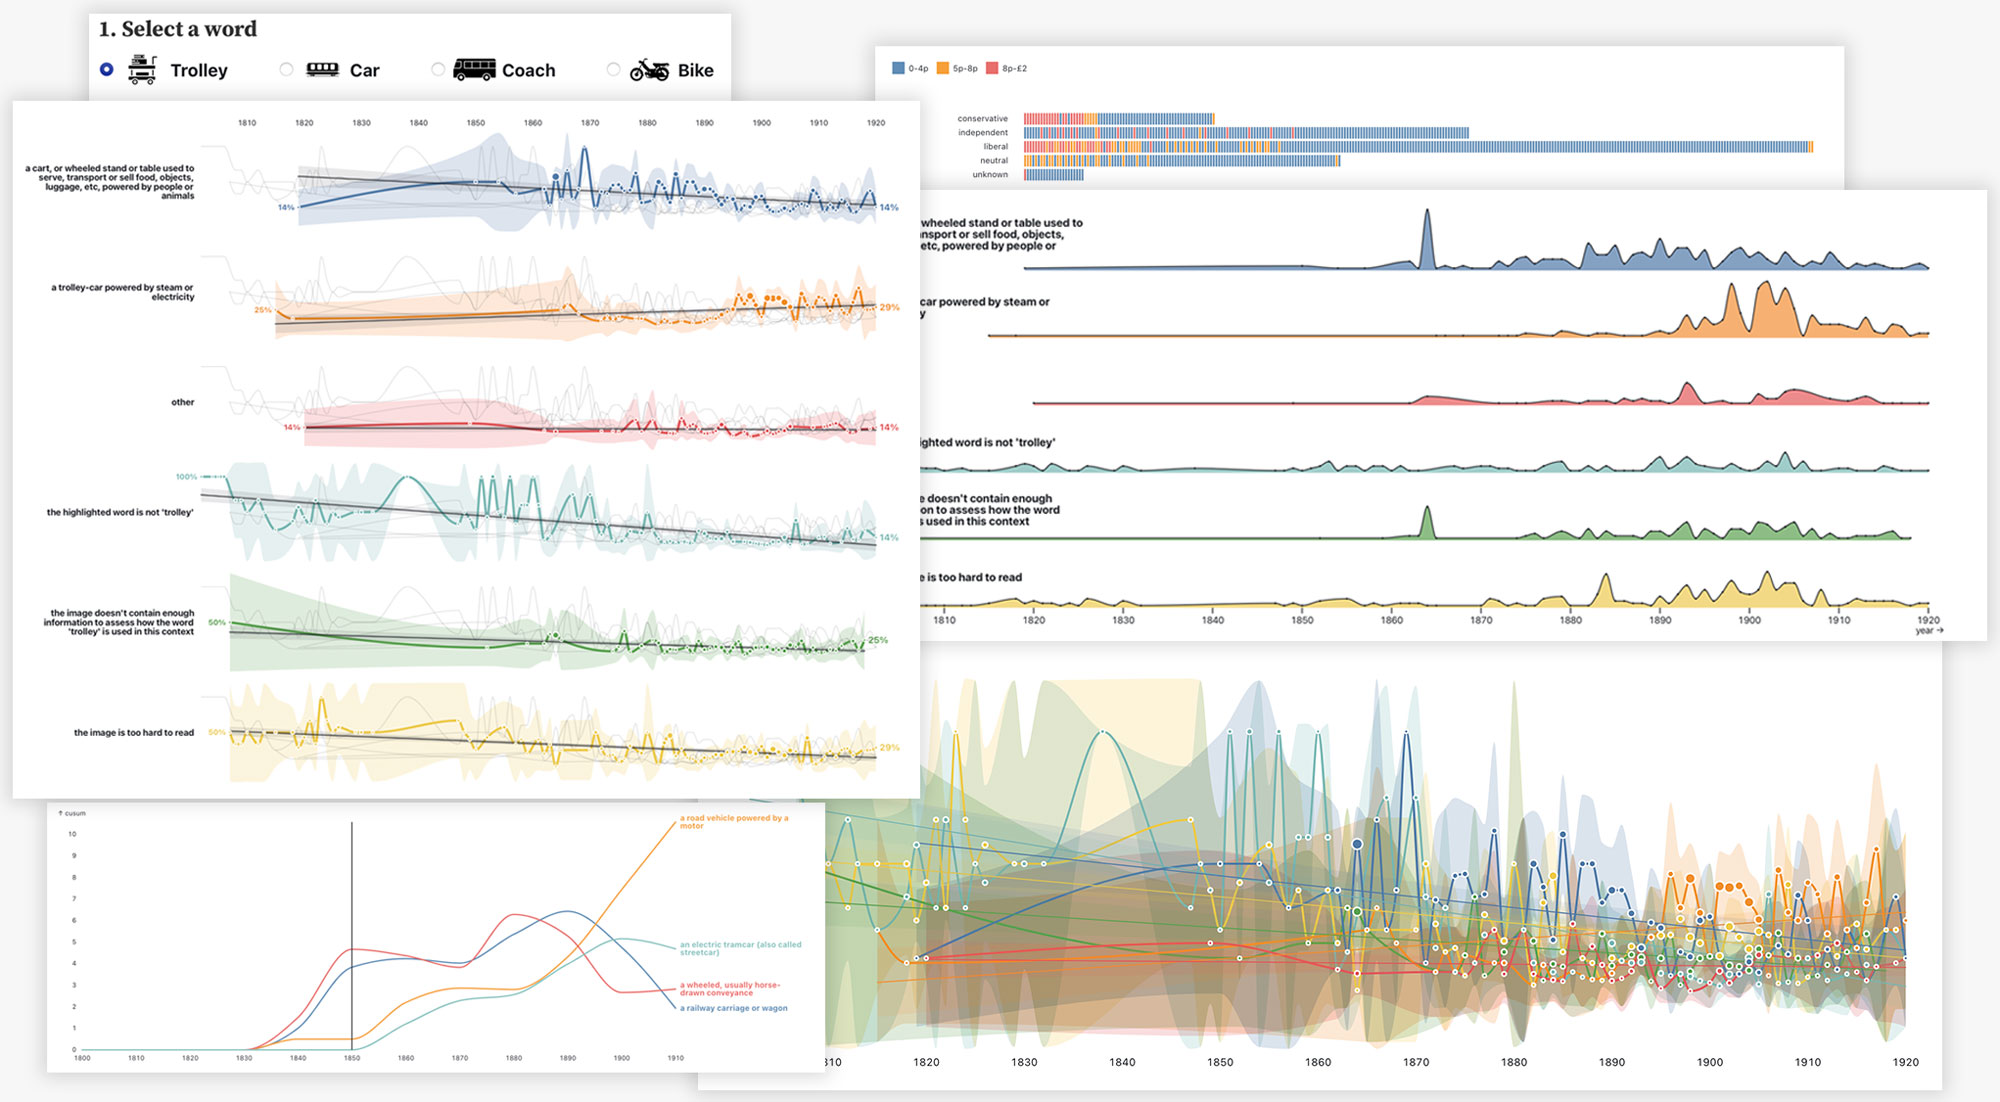  An assortment of graphs and charts are showcased, providing a visual breakdown of complex data.